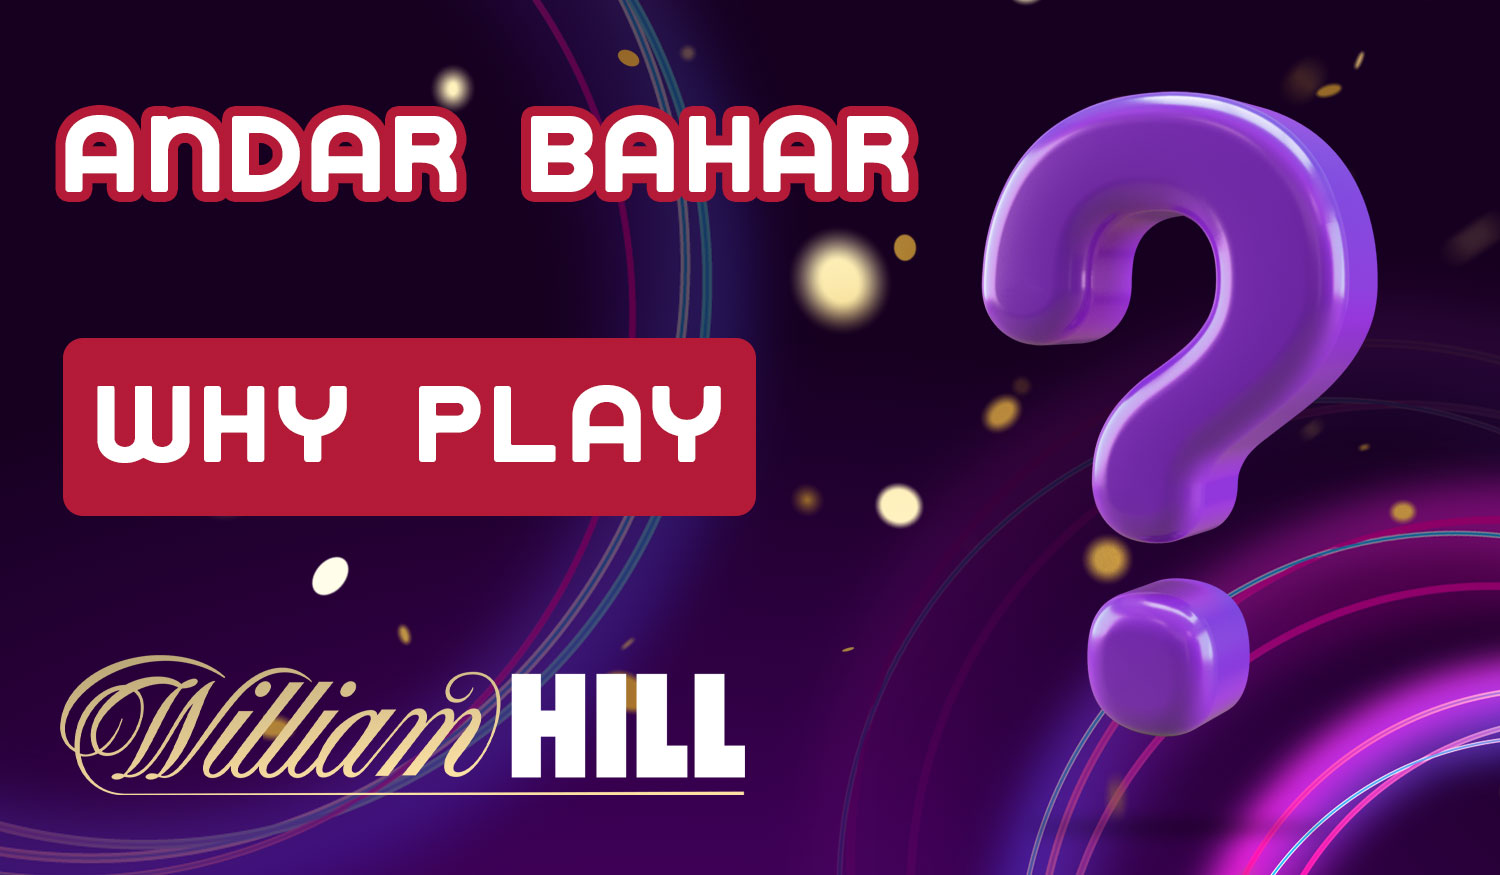 Short description of why Indian players should choose the William Hill platform for playing Andar Bahar